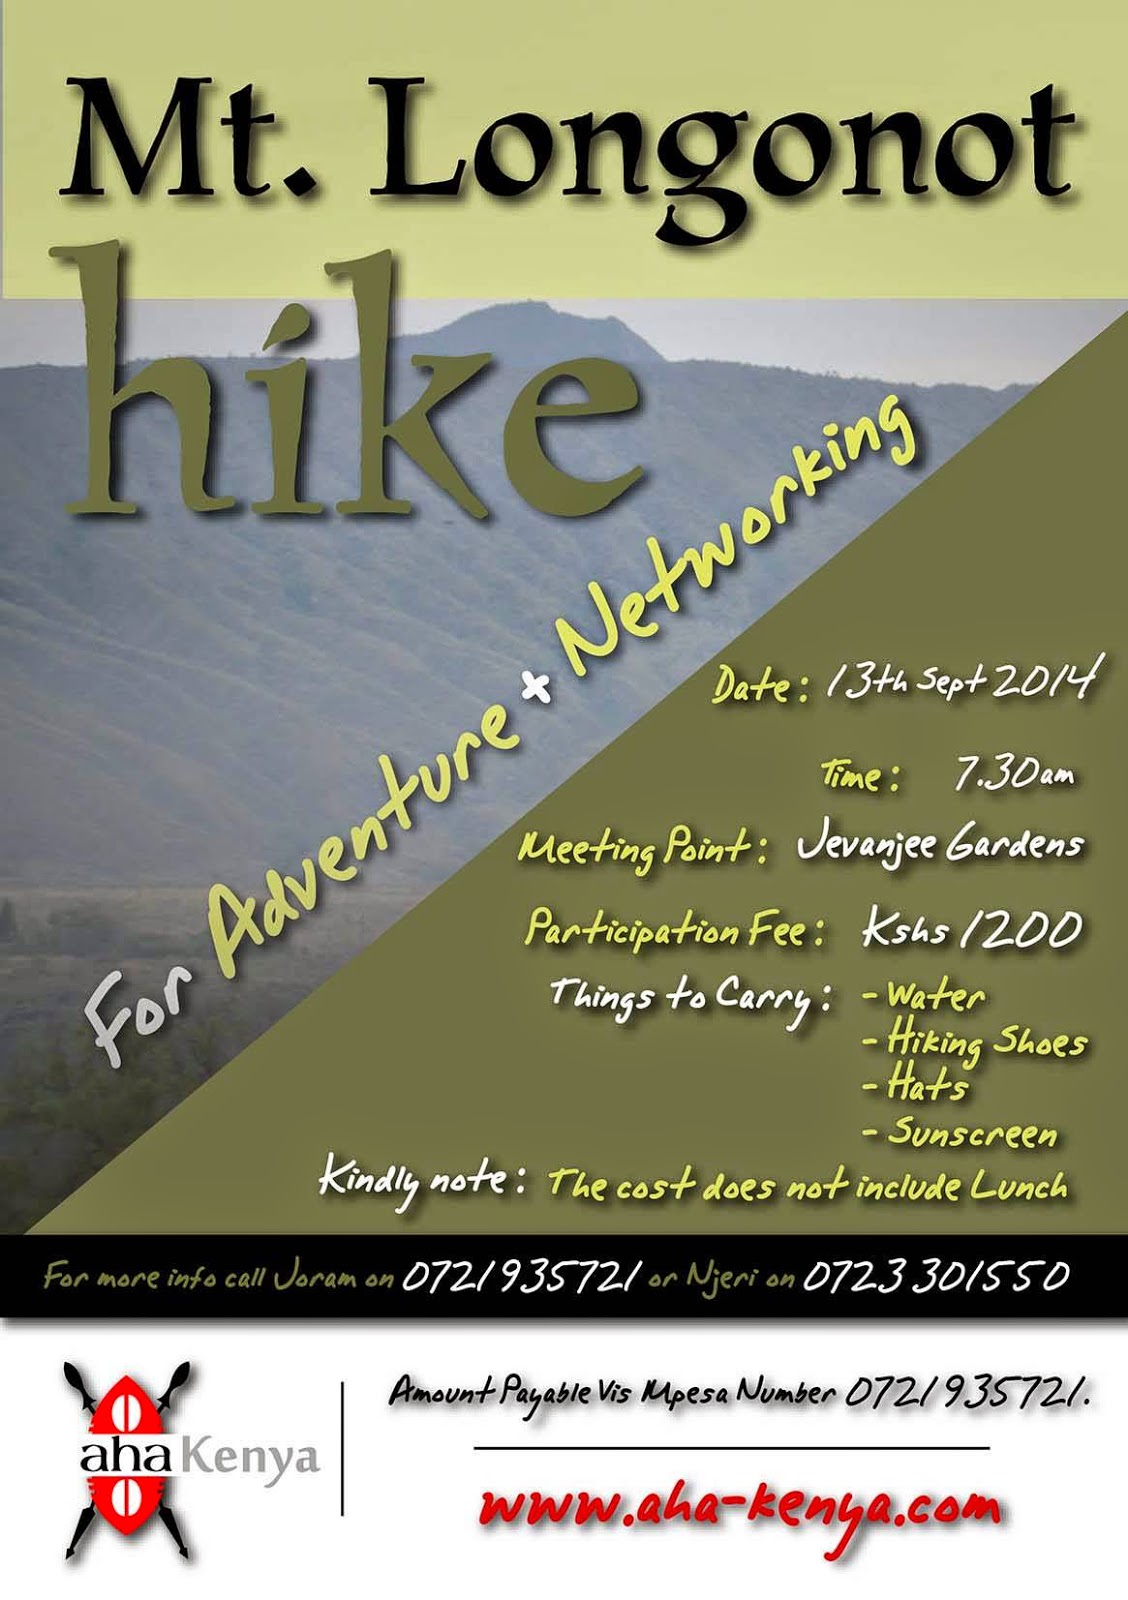 The Perspective: Hike, Hike, Hike at Mt. Longonot